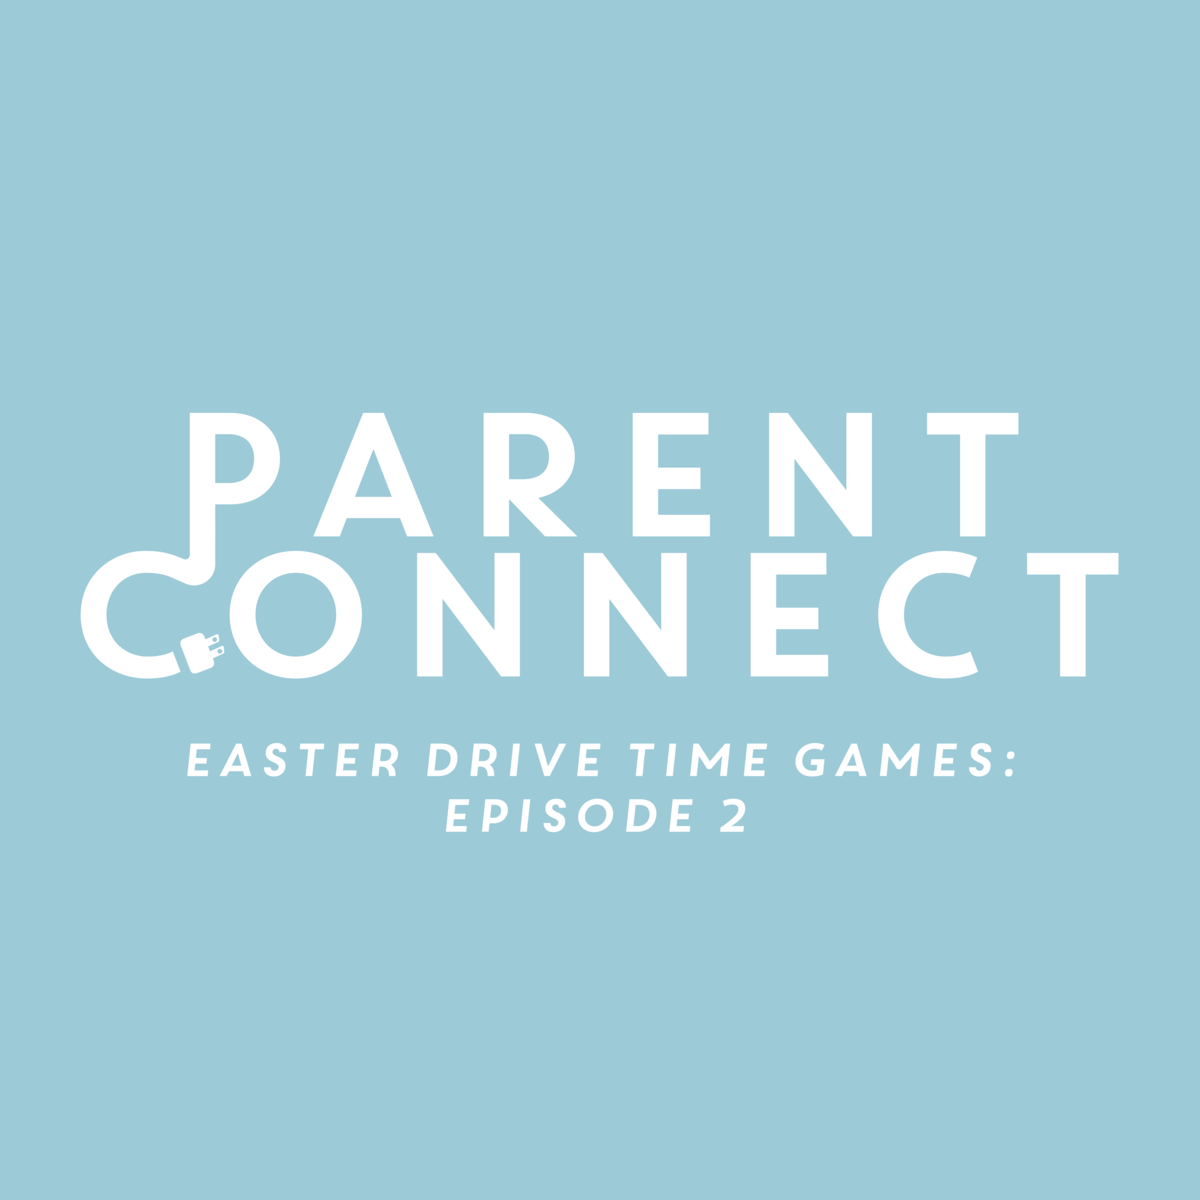 Easter Drive Time Games: Episode 2